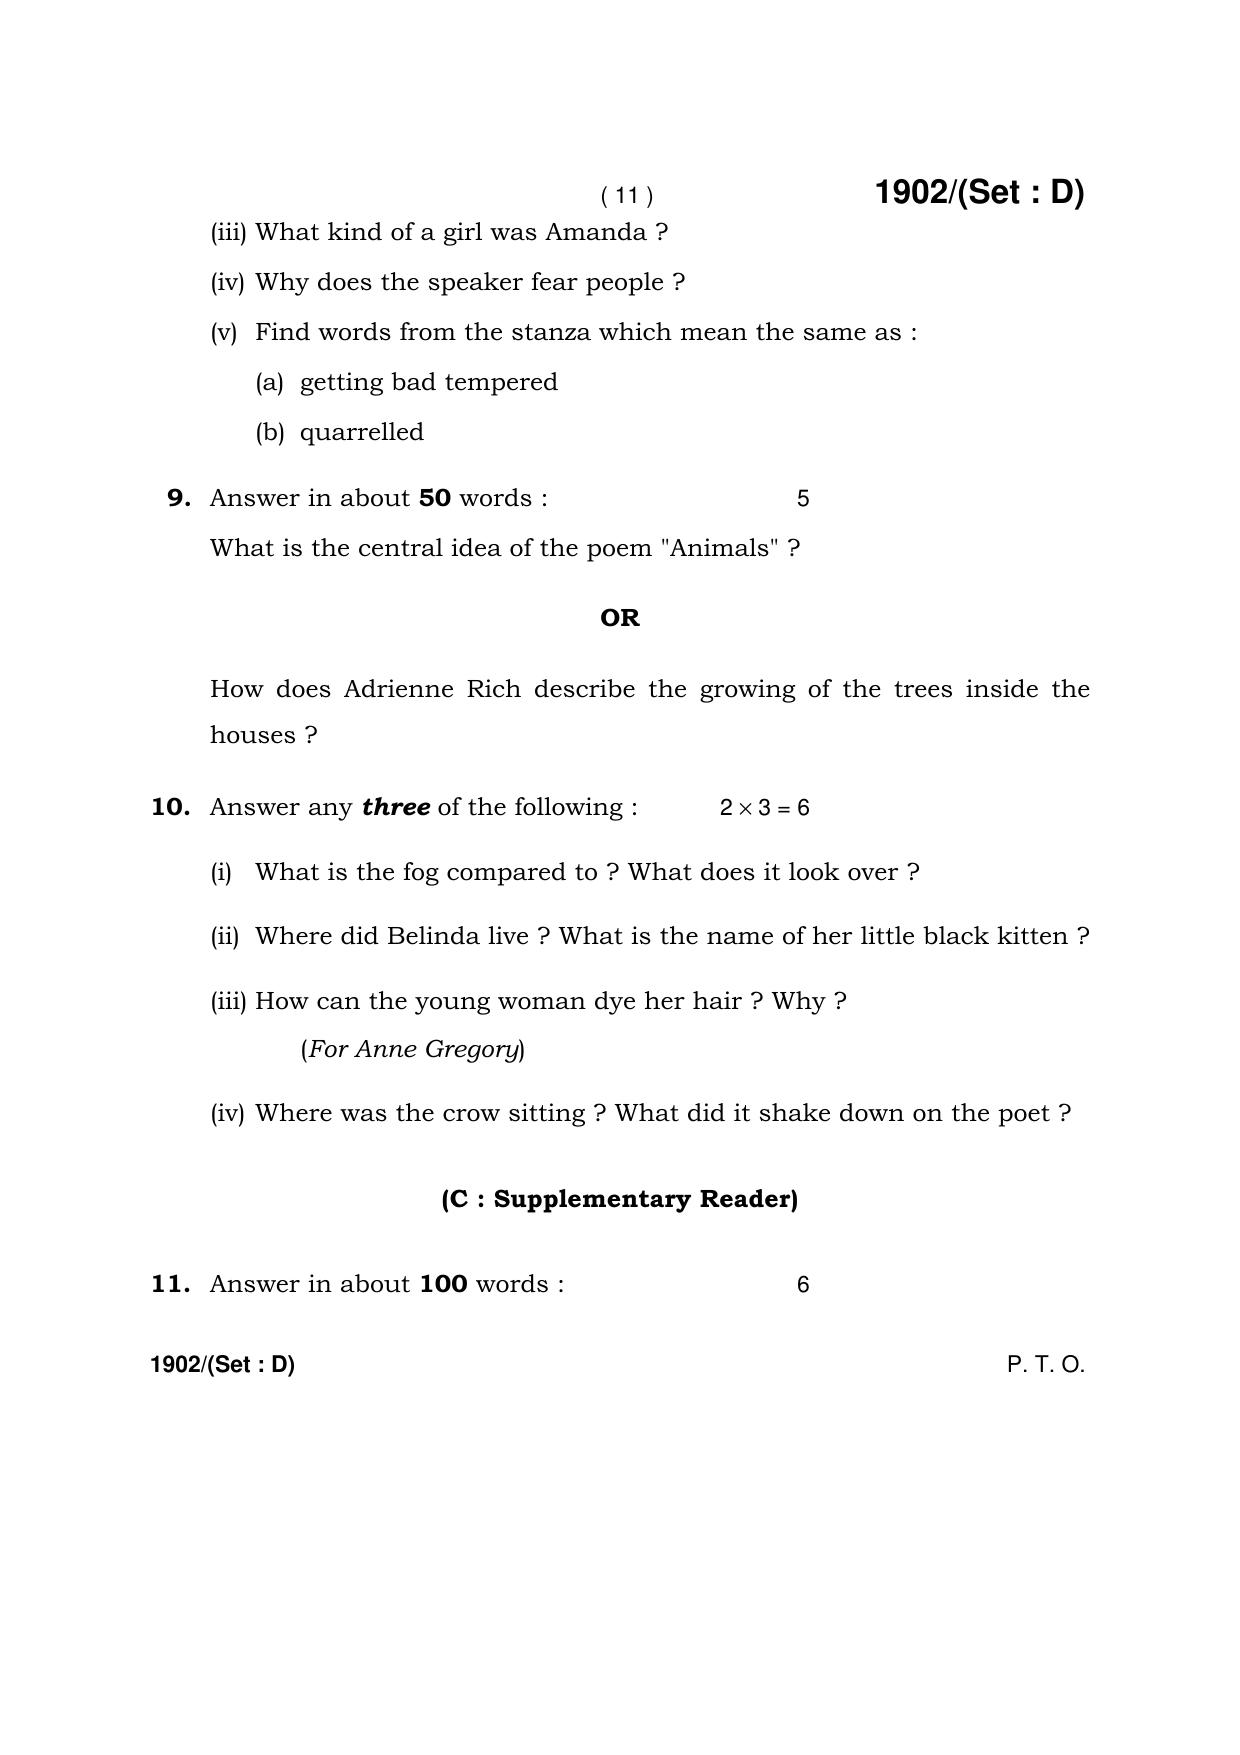 Haryana Board HBSE Class 10 English -D 2017 Question Paper - Page 11